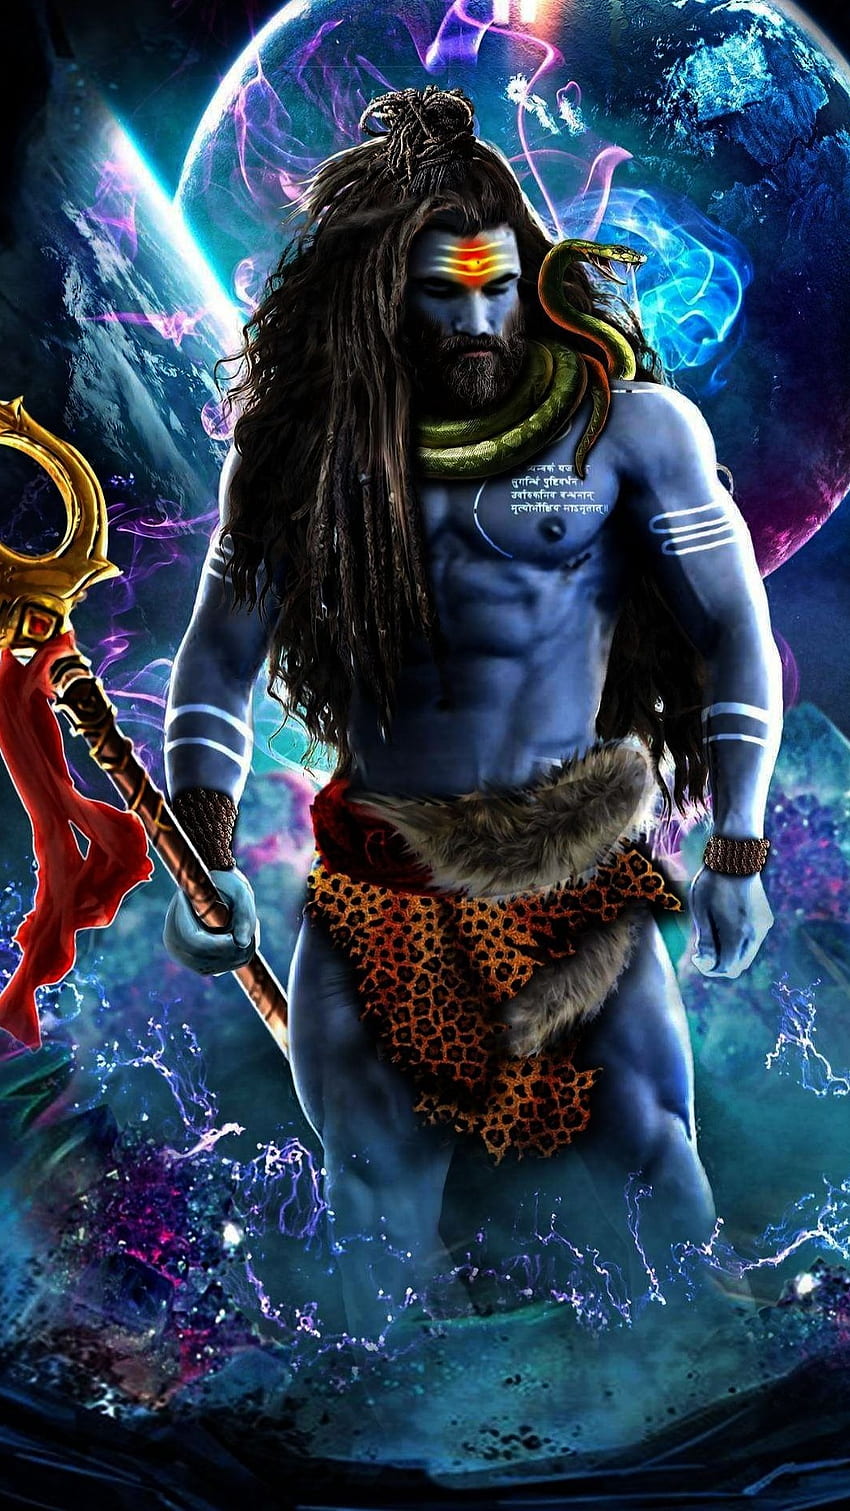 Ultimate Collection of 999+ Incredible 4K Images of Lord Mahadev